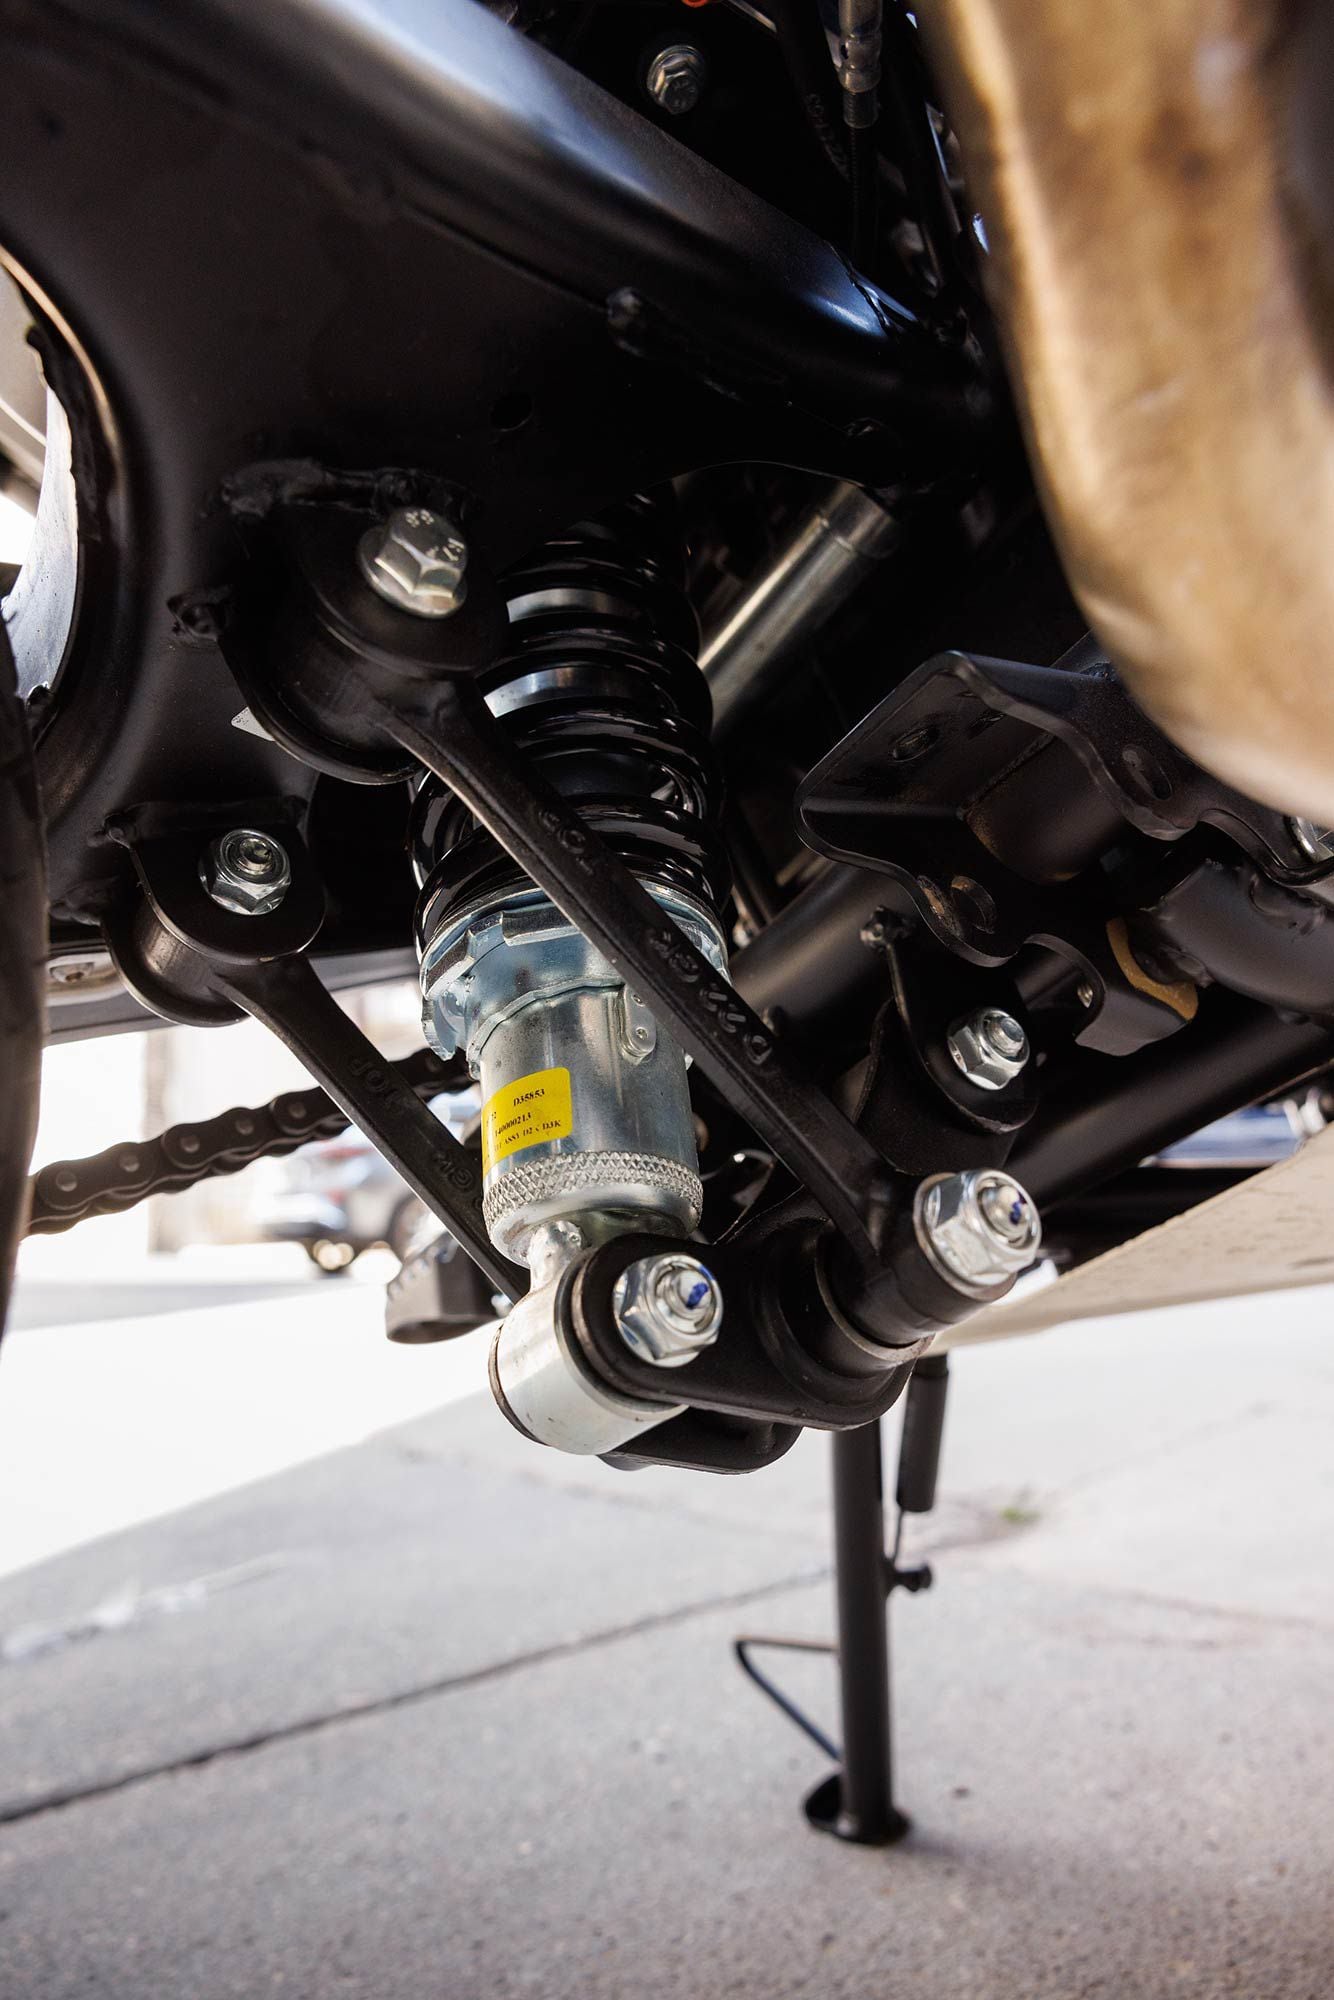 The Scram’s basic rear shock with linkage is adequate for most situations but offers only minimal preload adjustments.